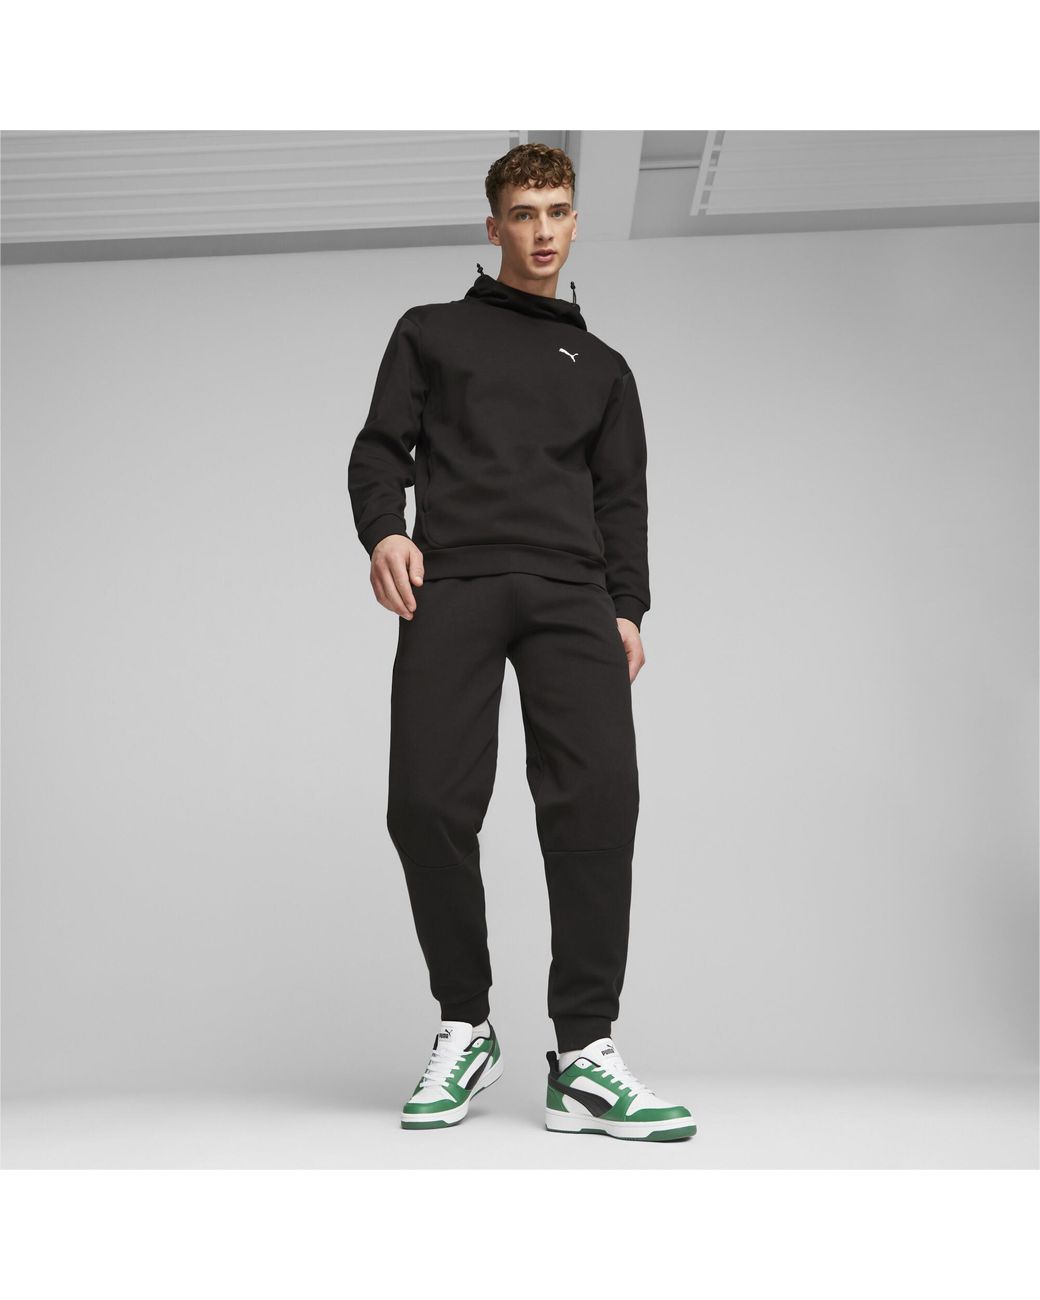 Sneakers | Lyst Men in V6 PUMA Rebound for Green Low